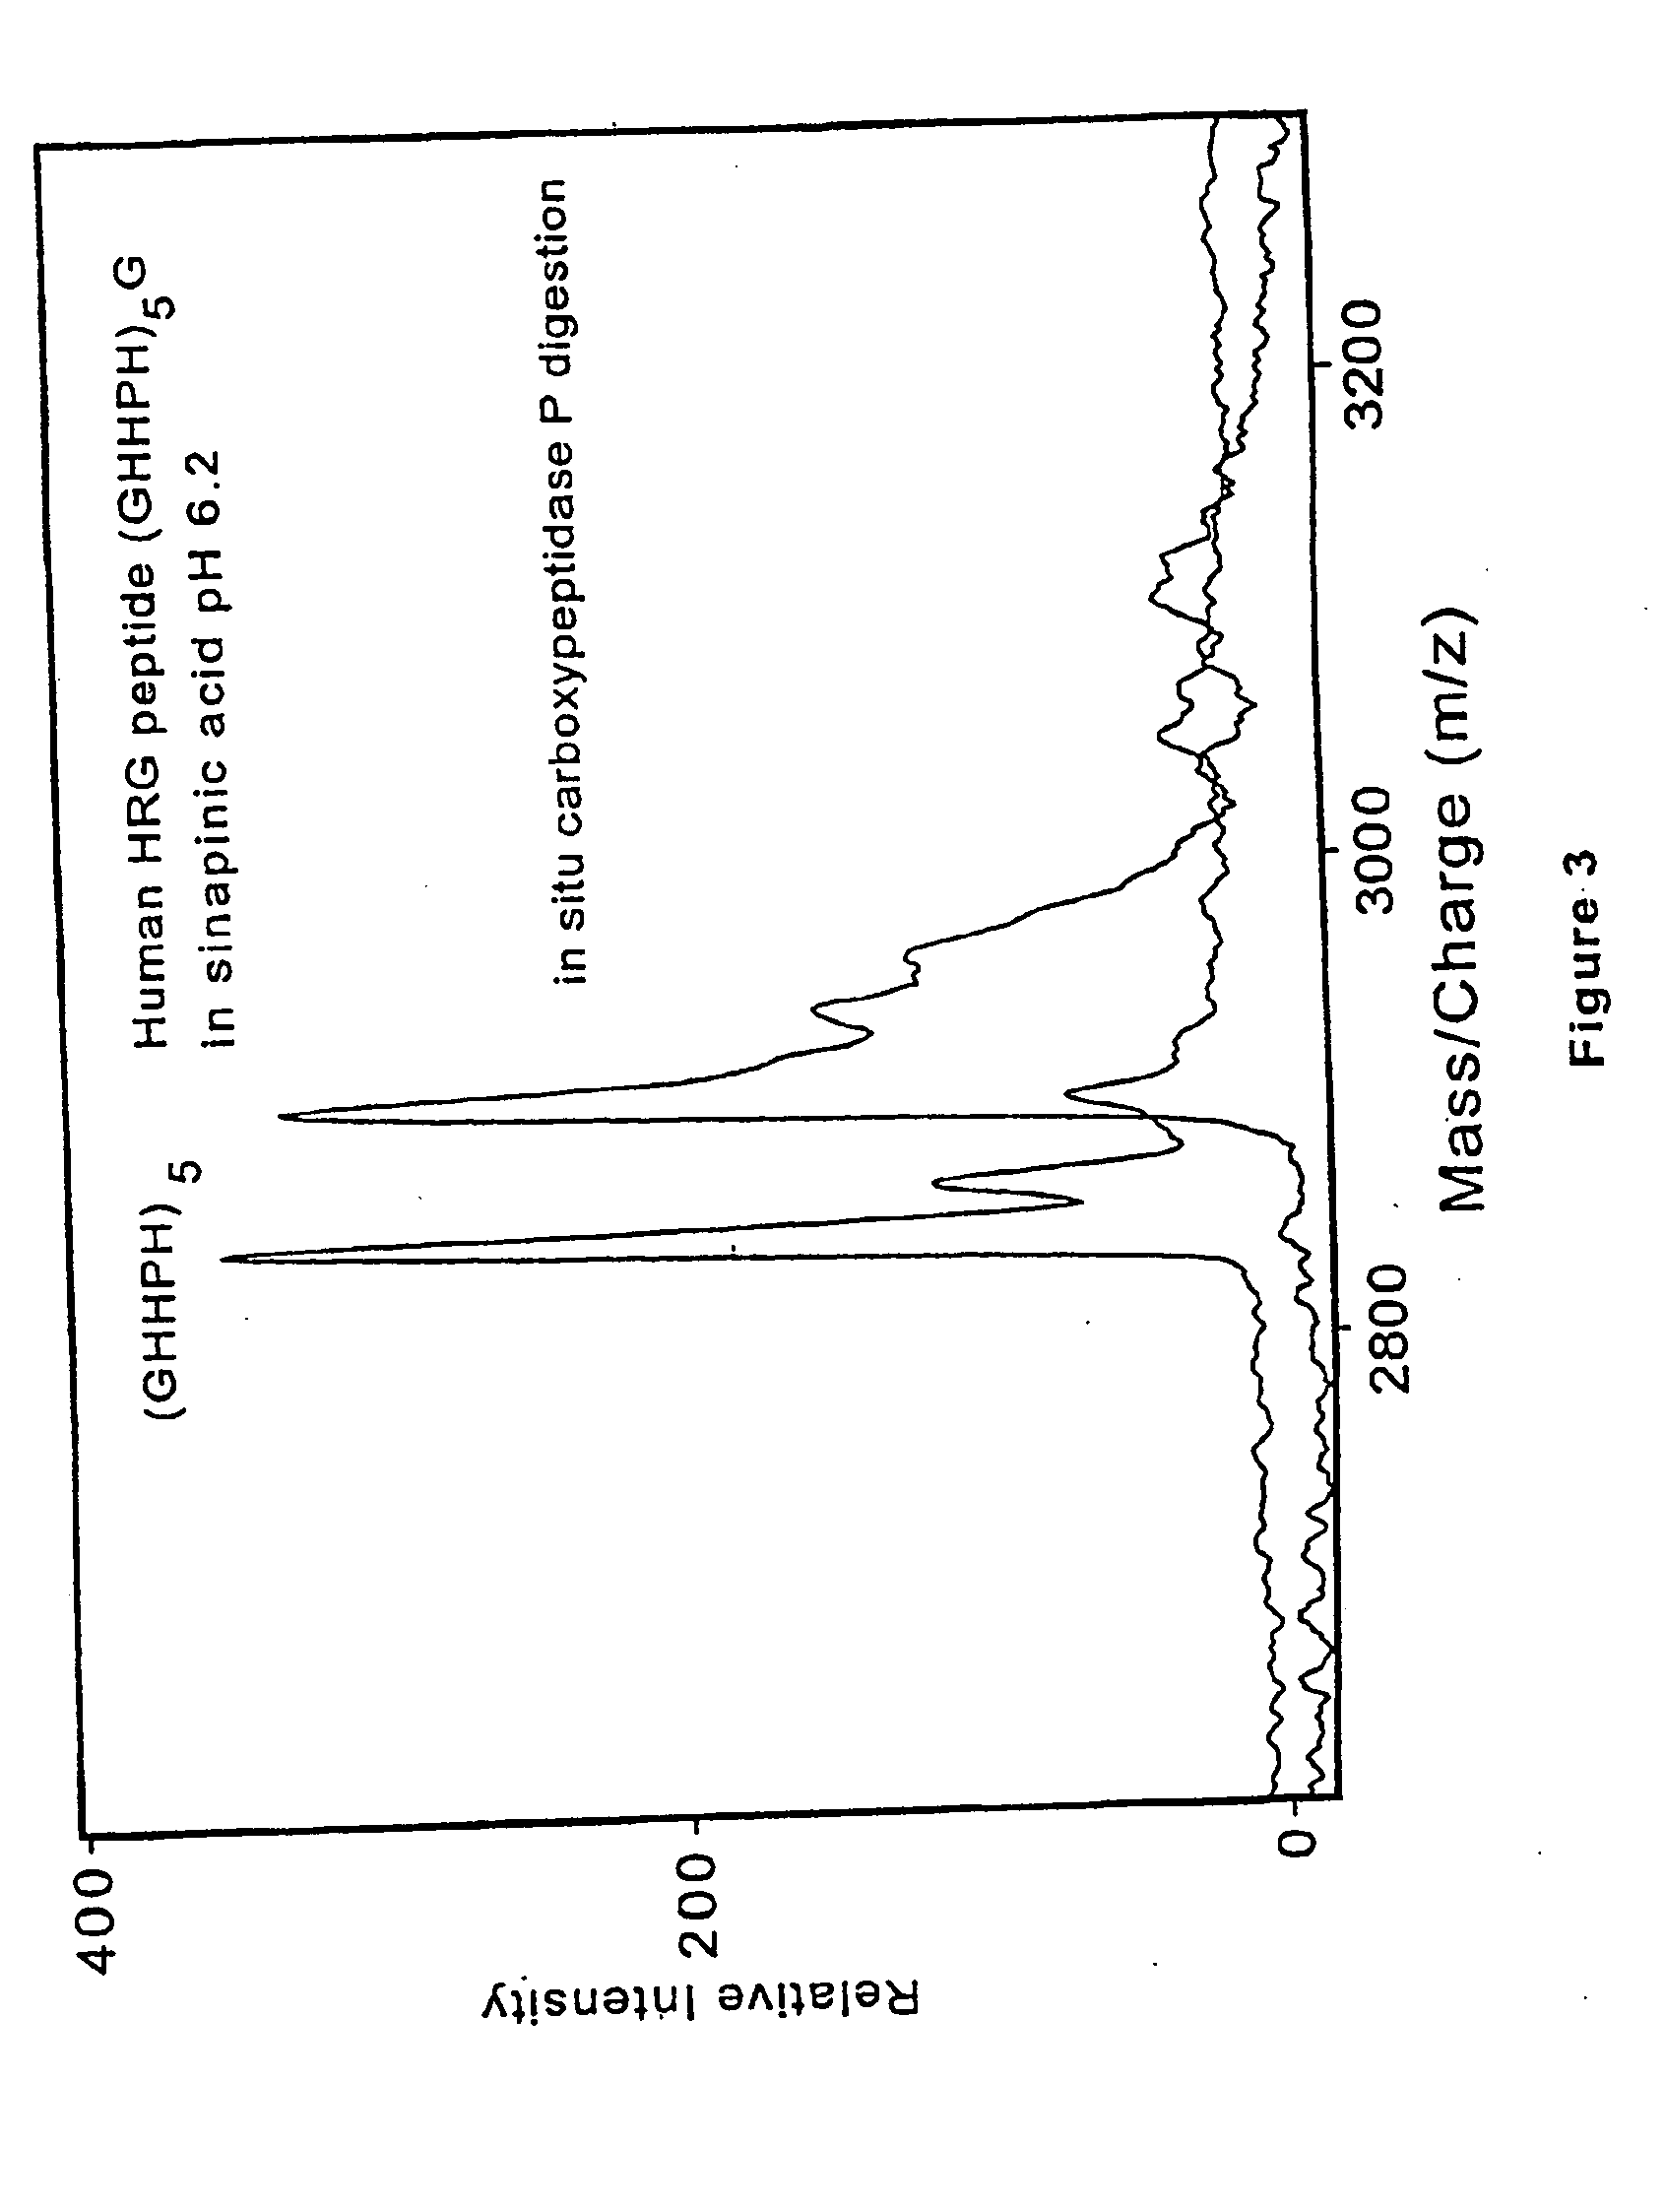 Method and apparatus for desorption and ionization of analytes